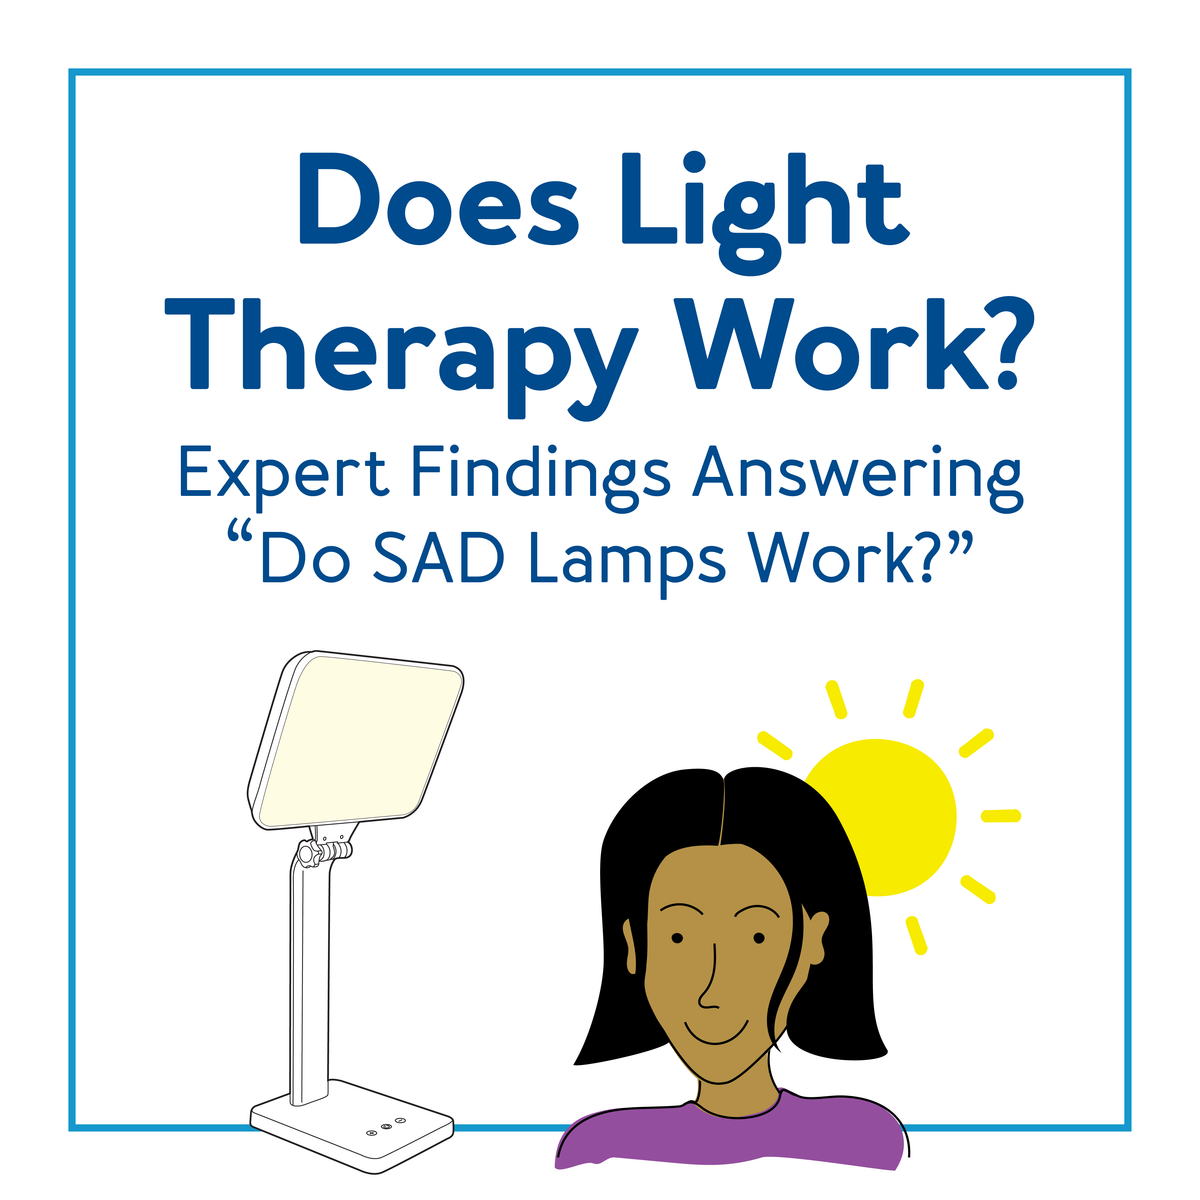 Graphic: Woman, sun, therapy lamp. Text: Does Light Therapy Work? Expert Findings on SAD Lamps.